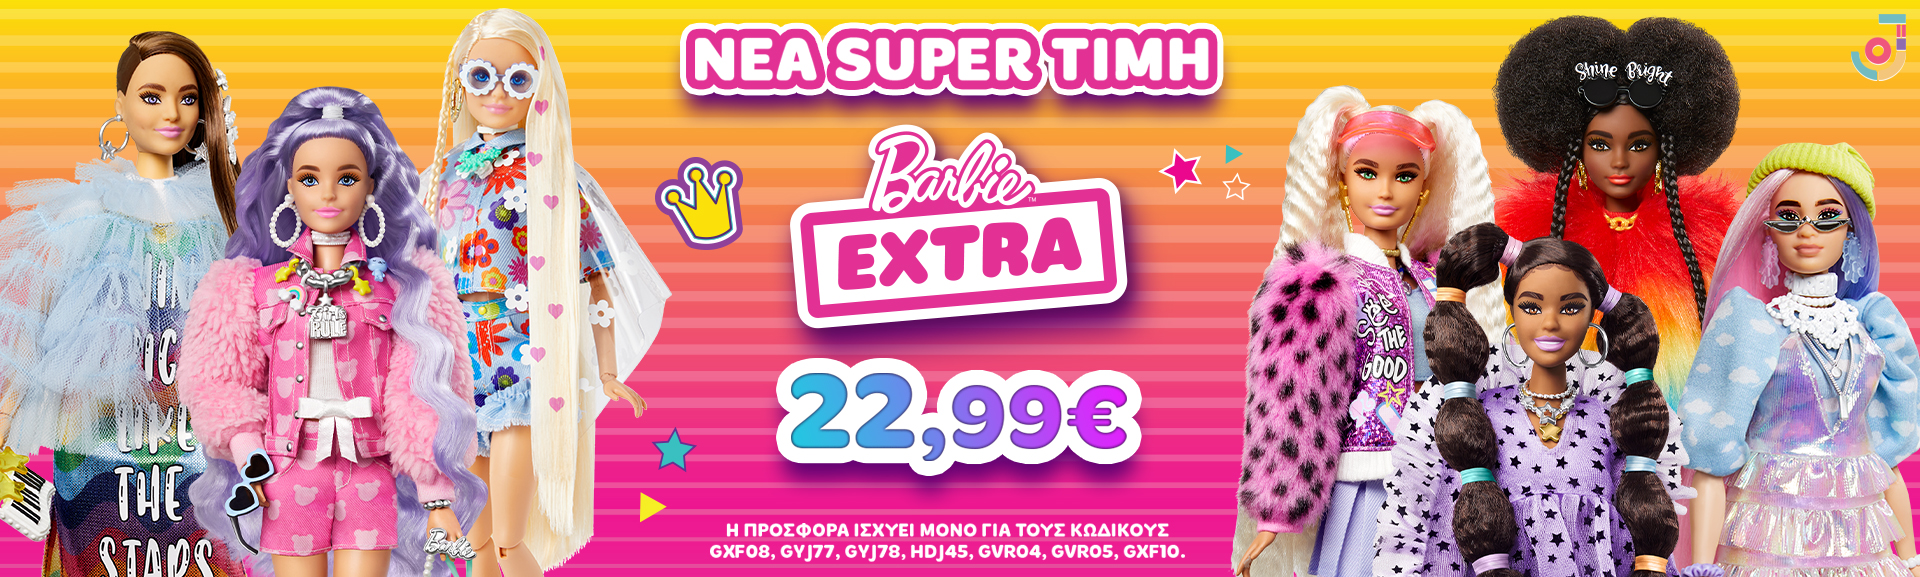 BANNER BARBIE EXTRA 1920x577 1